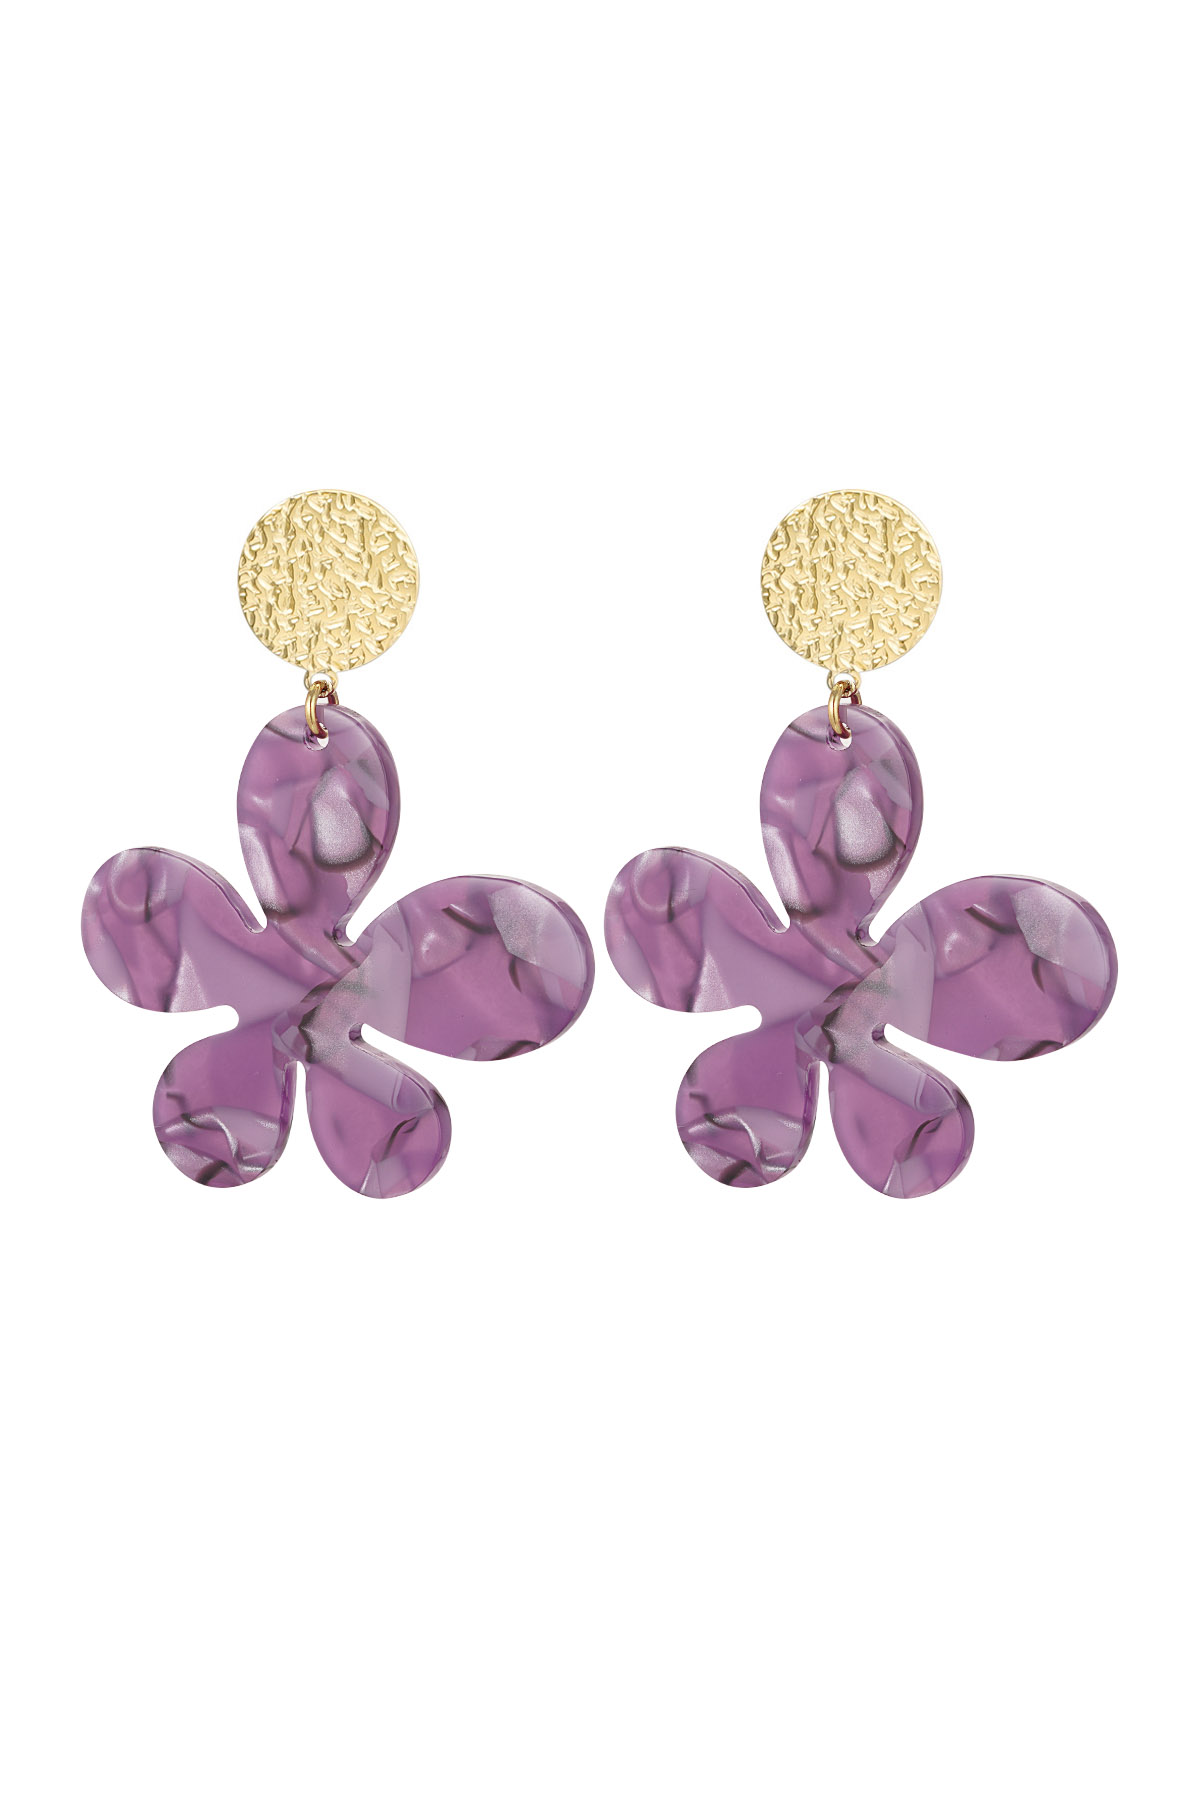 Flower earrings with print - gold/purple h5 